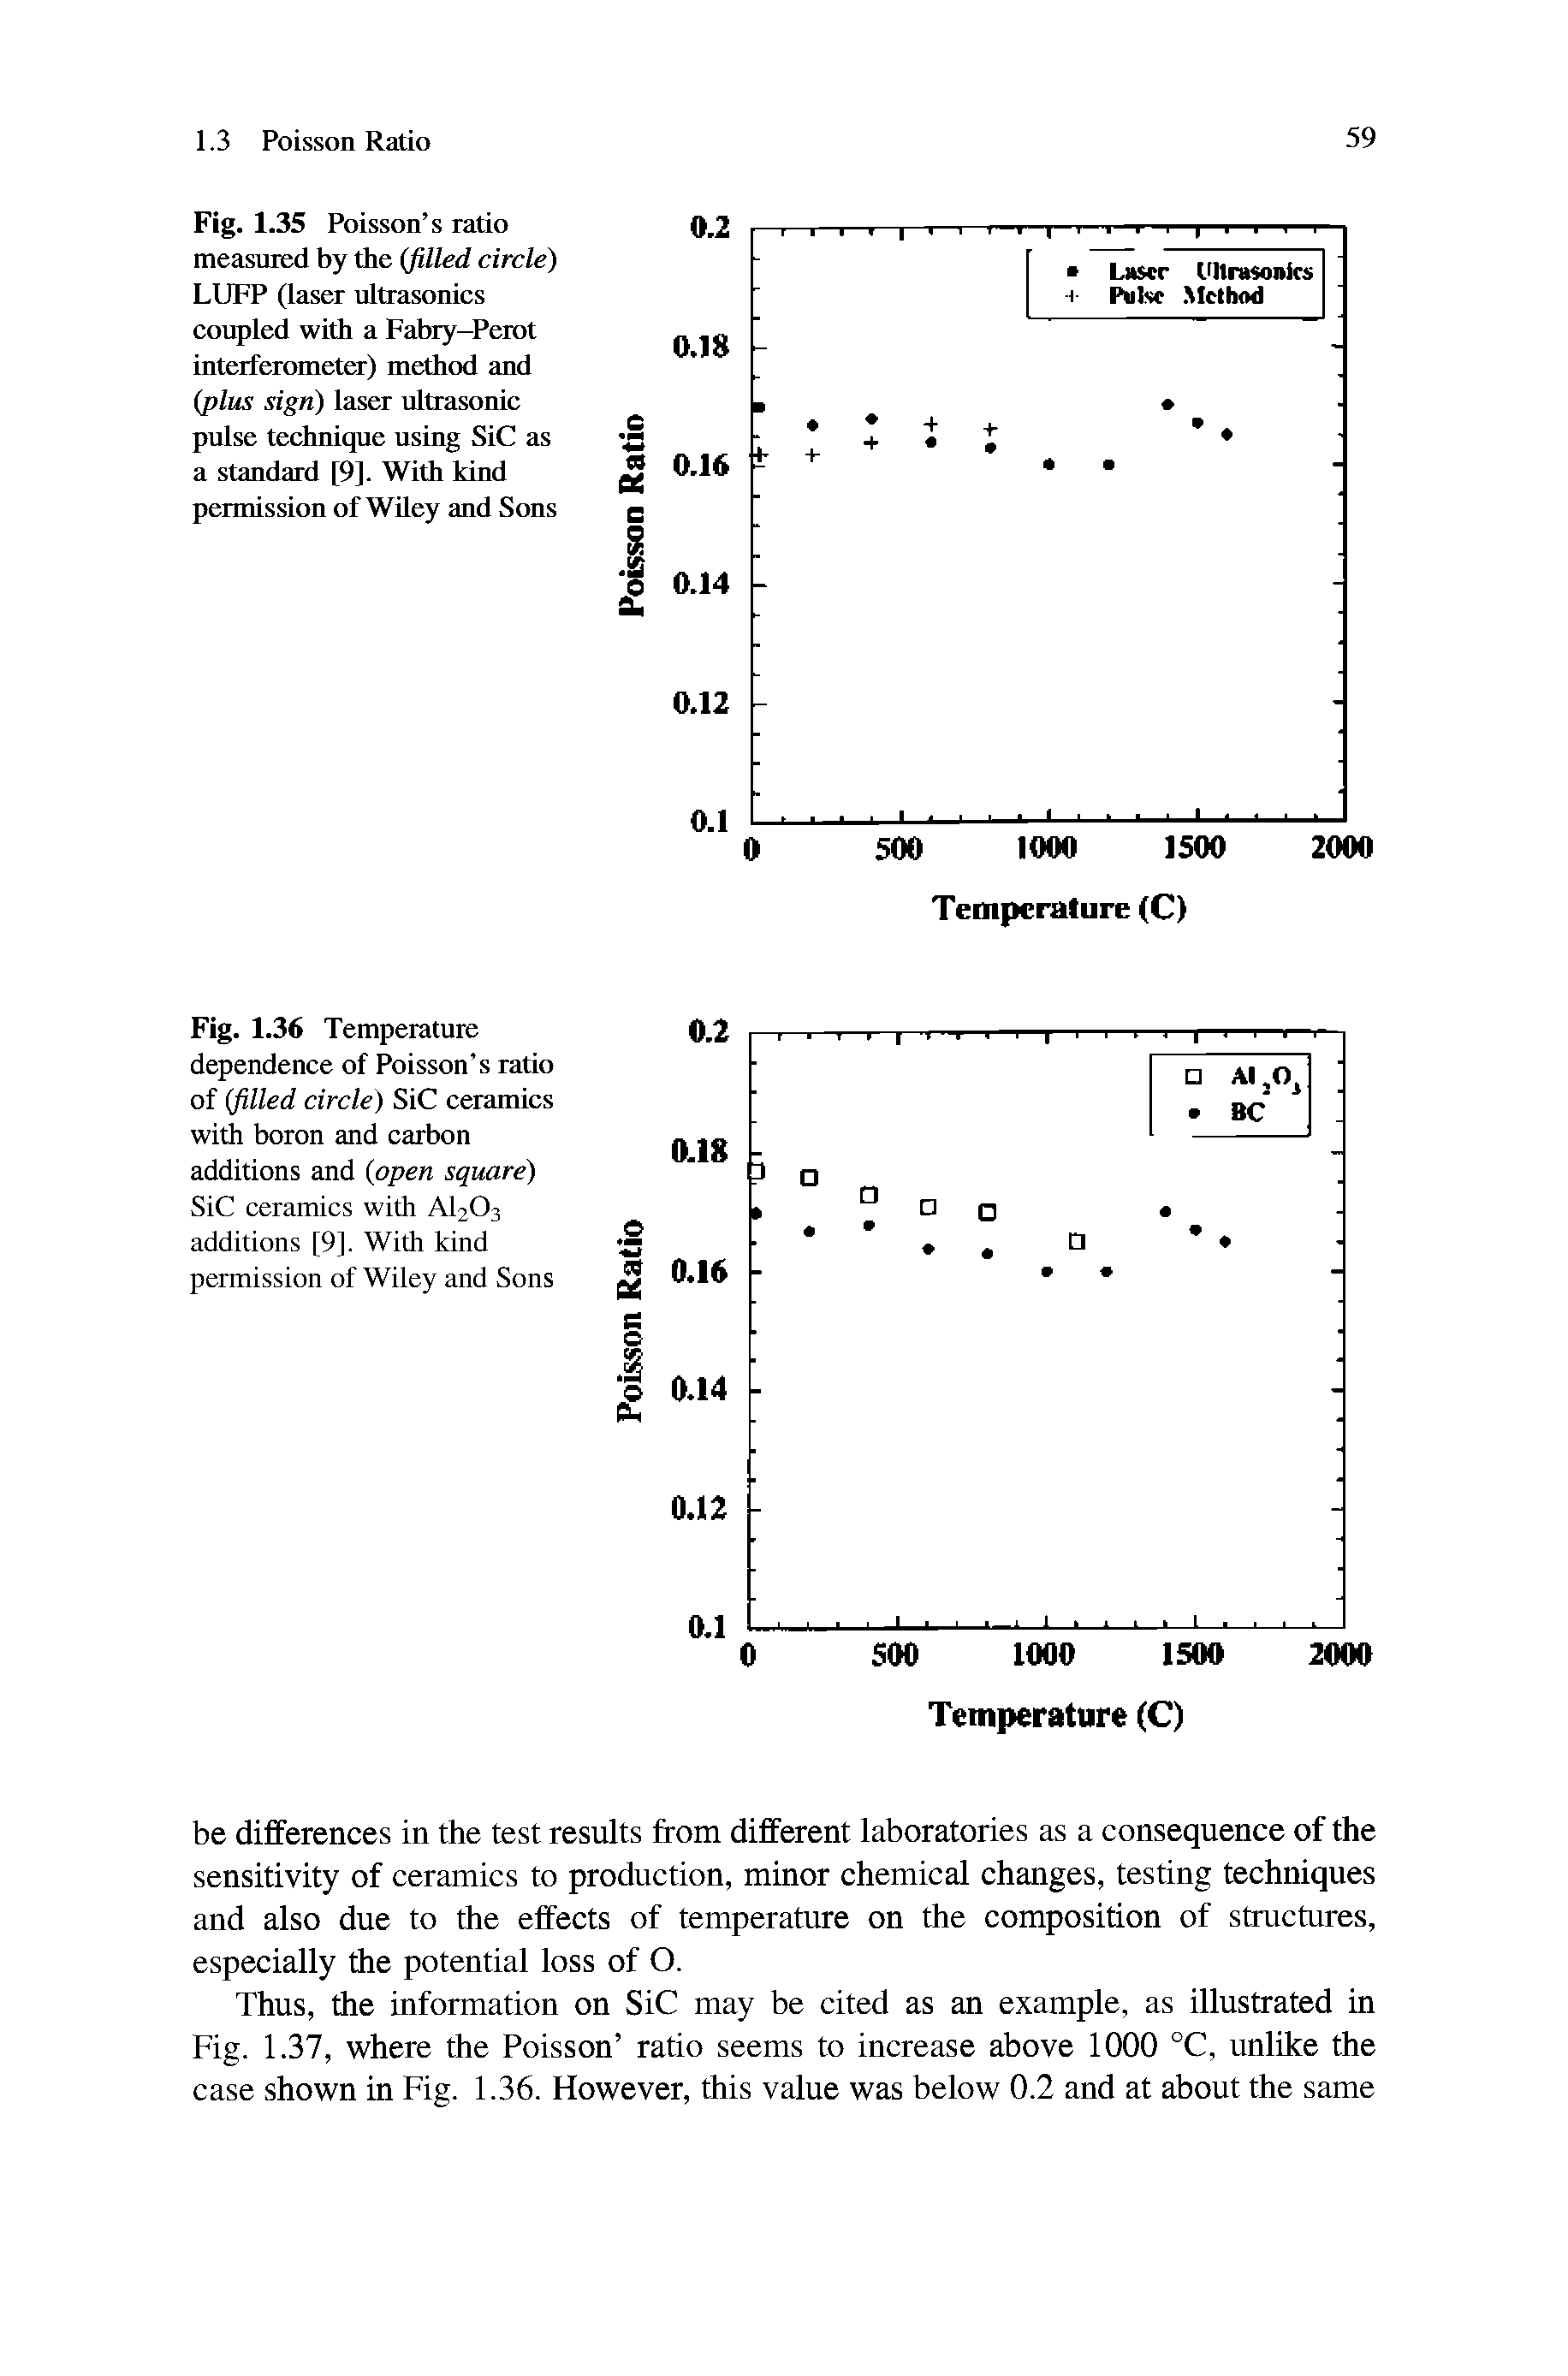 Fig. 1.35 Poisson s ratio measured by the (filled circle) LUFP (laser ultrasonics coupled with a Fabry-Perot interferometer) method and (plus sign) laser ultrasonic pulse technique using SiC as a standard [9]. With kind permission of Wiley and Sons...